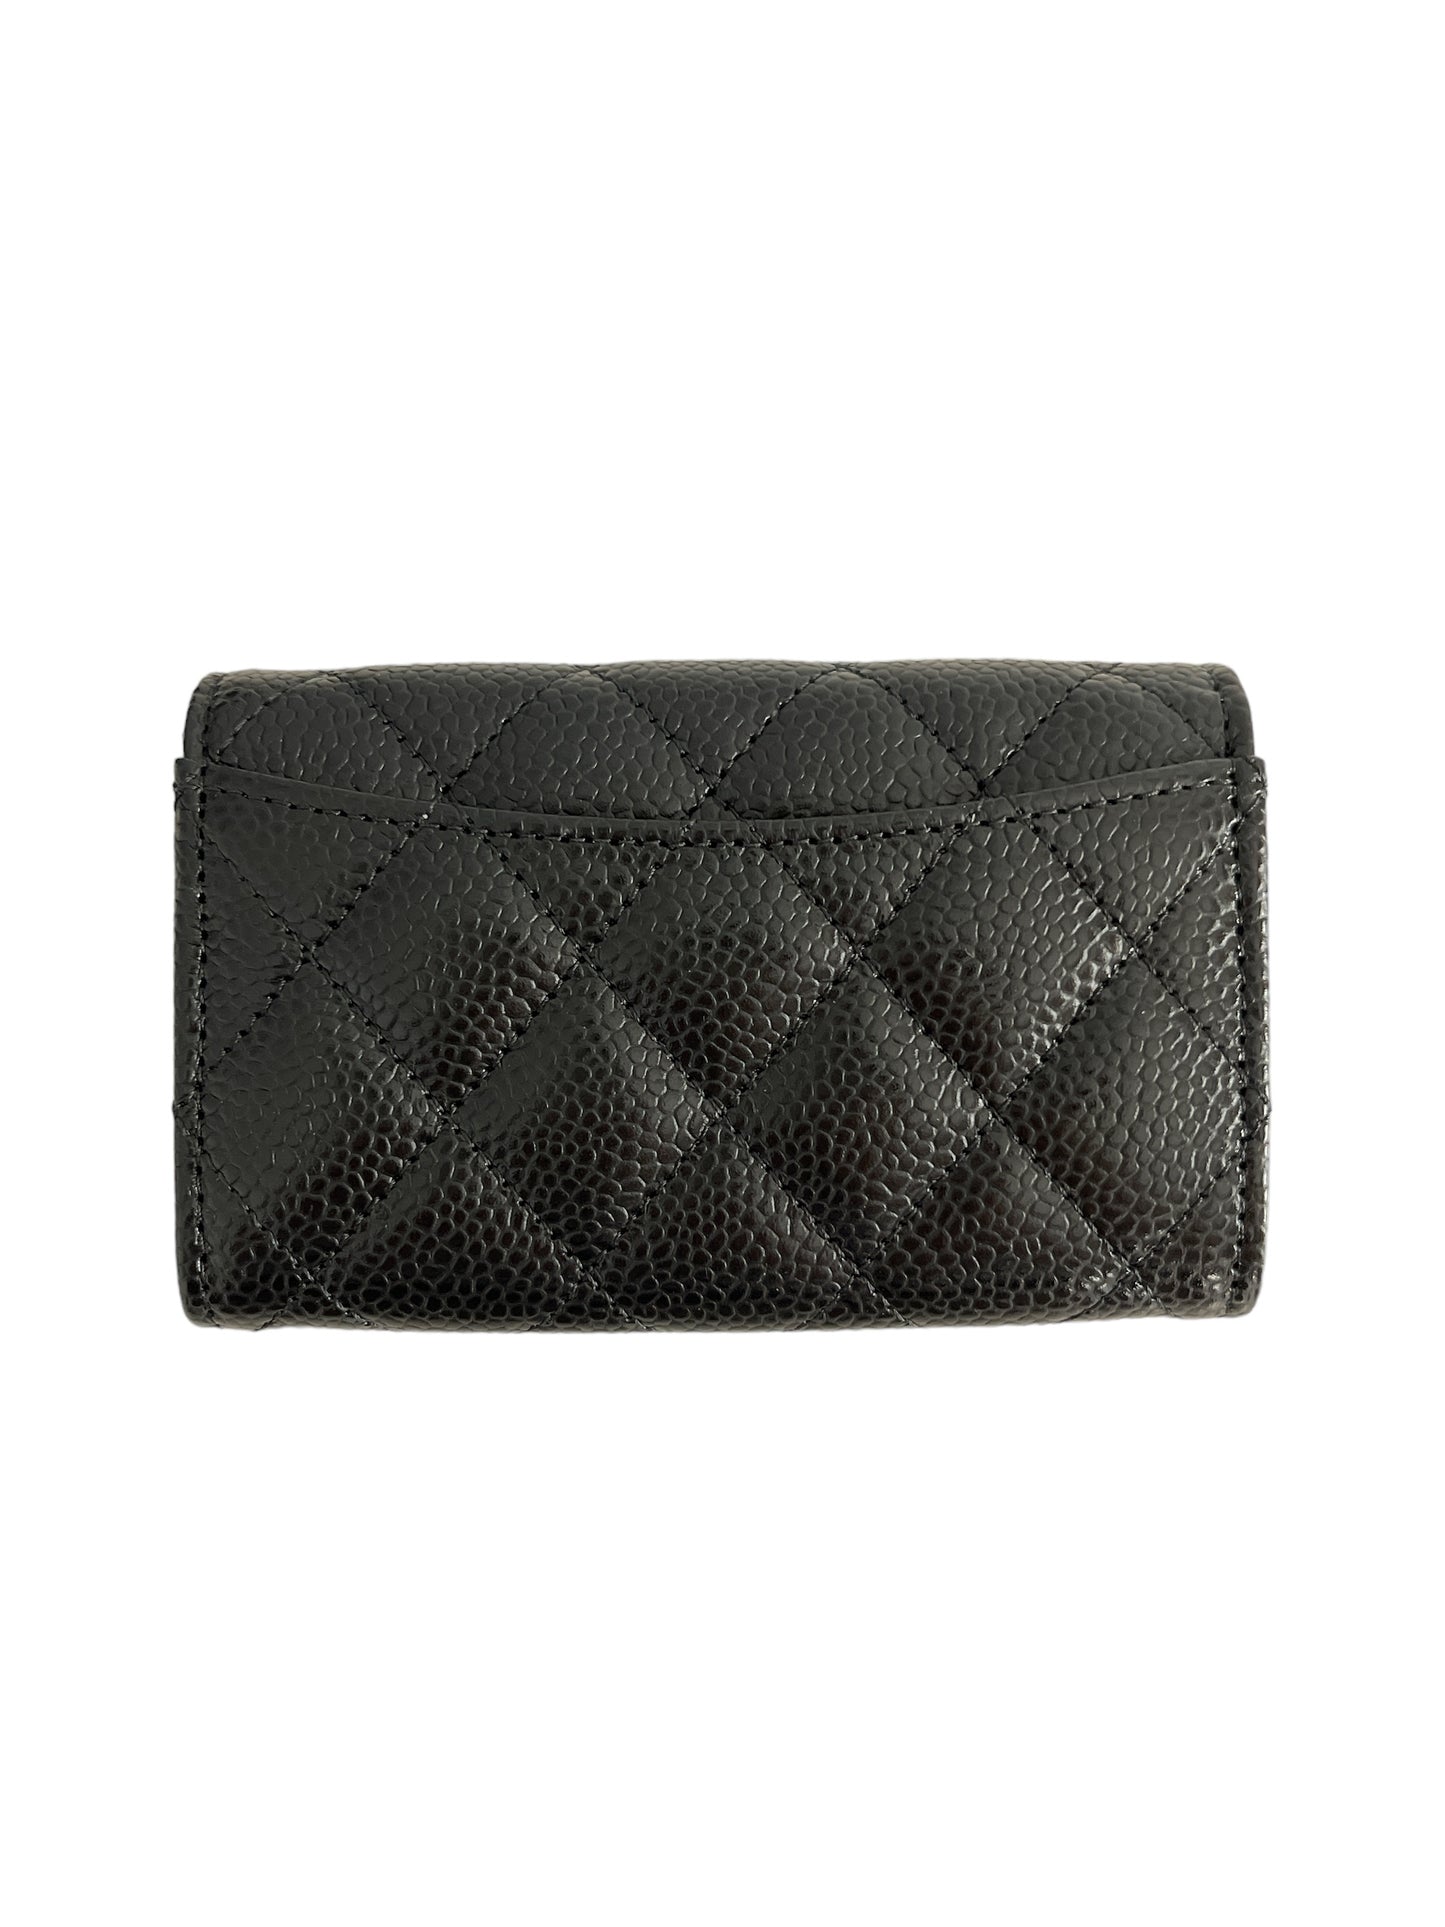 CHANEL
Black Quilted Caviar Leather Classic Flap Card Holder